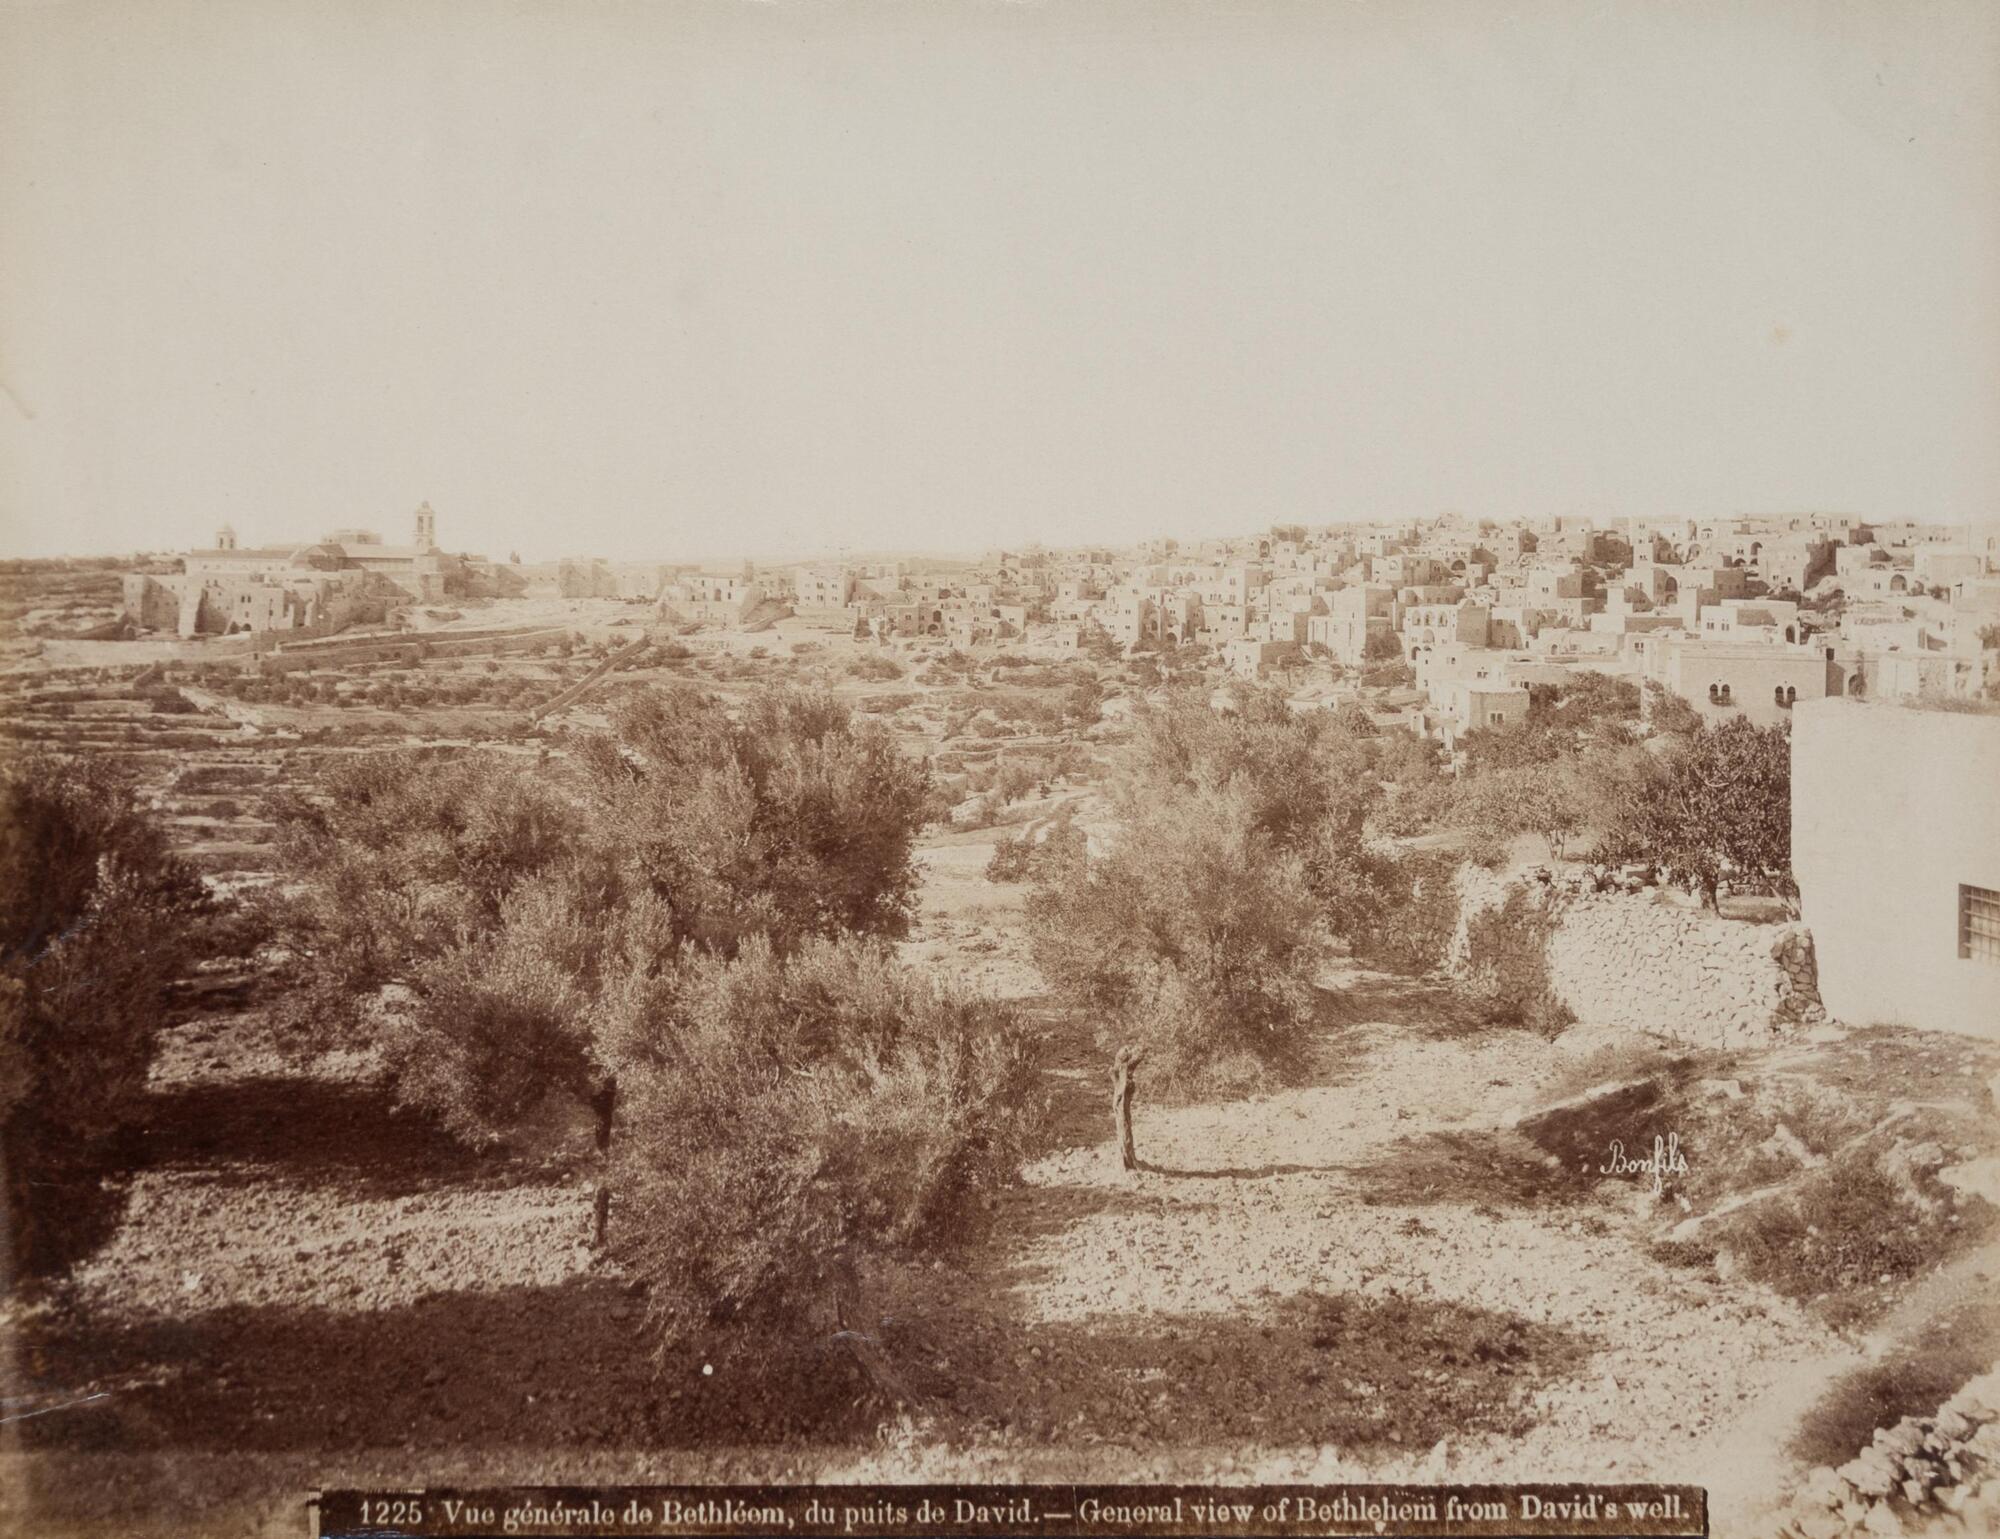 General view of a large town in the distance along a gently curving horizon line; a group of trees stand in the foreground.